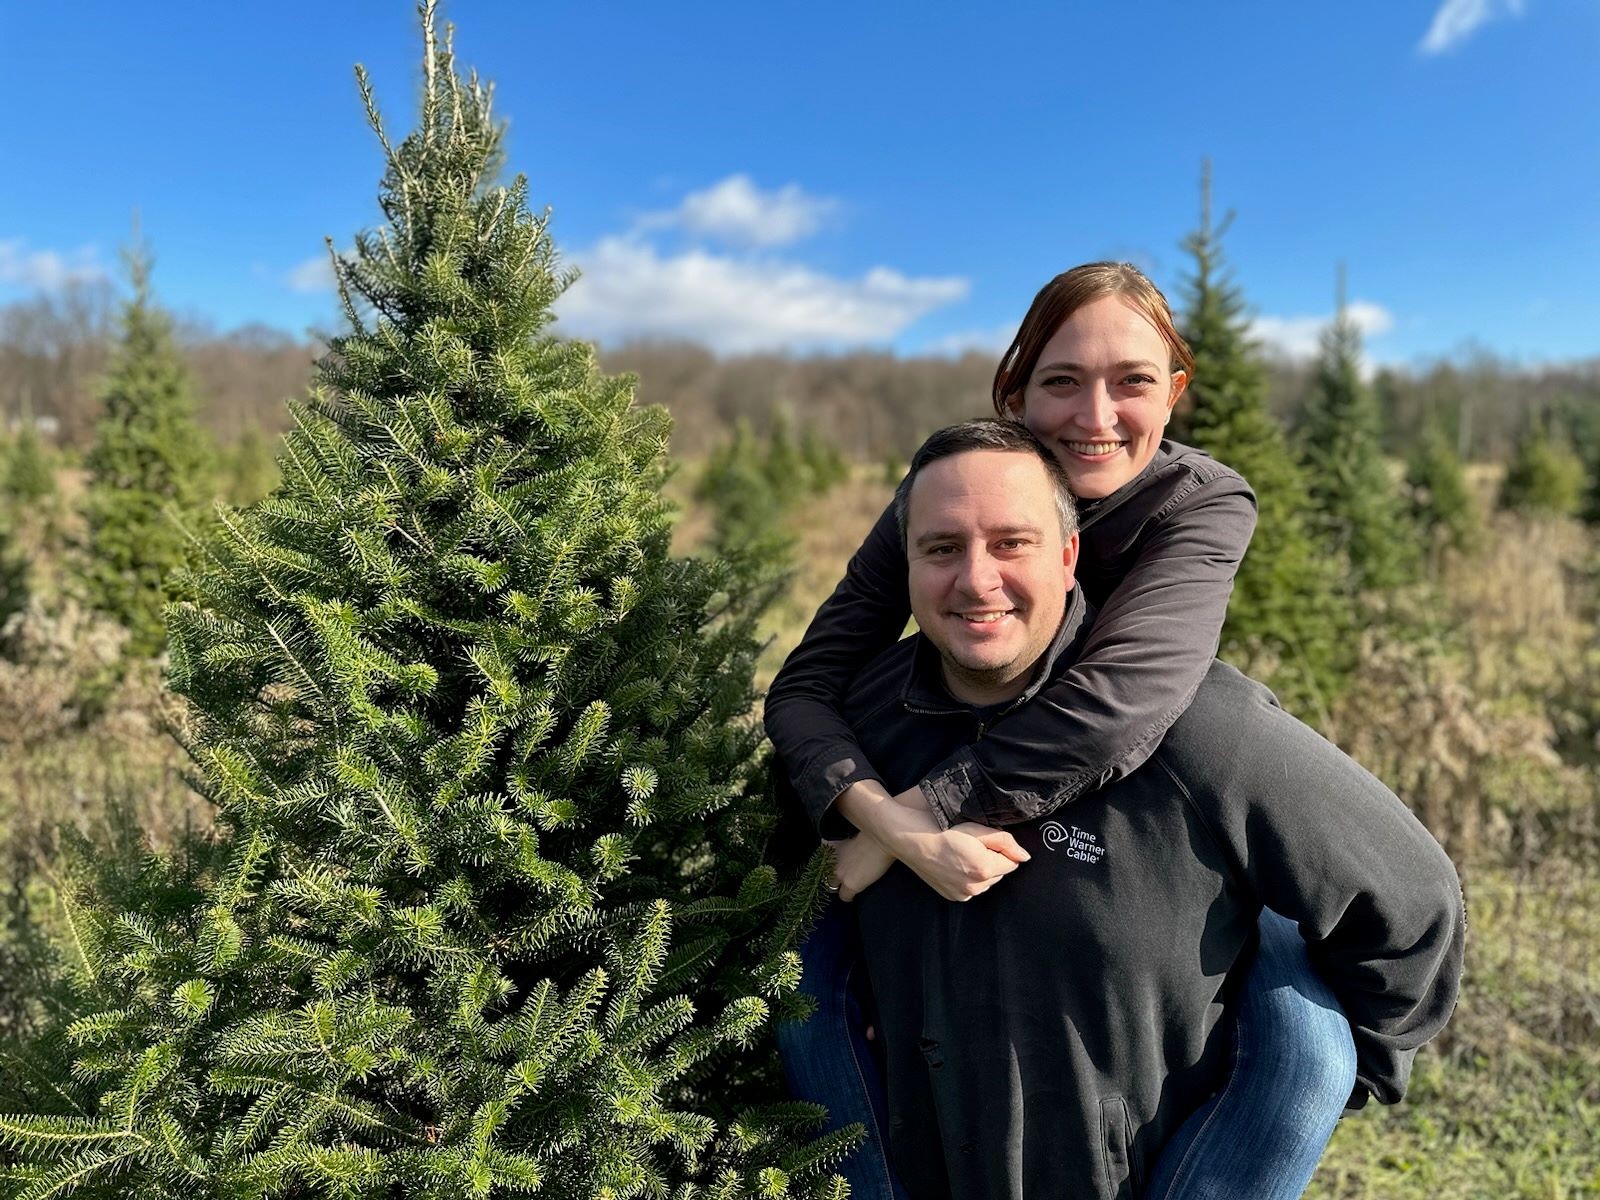 Nick and Abigail searching for the perfect Christmas tree